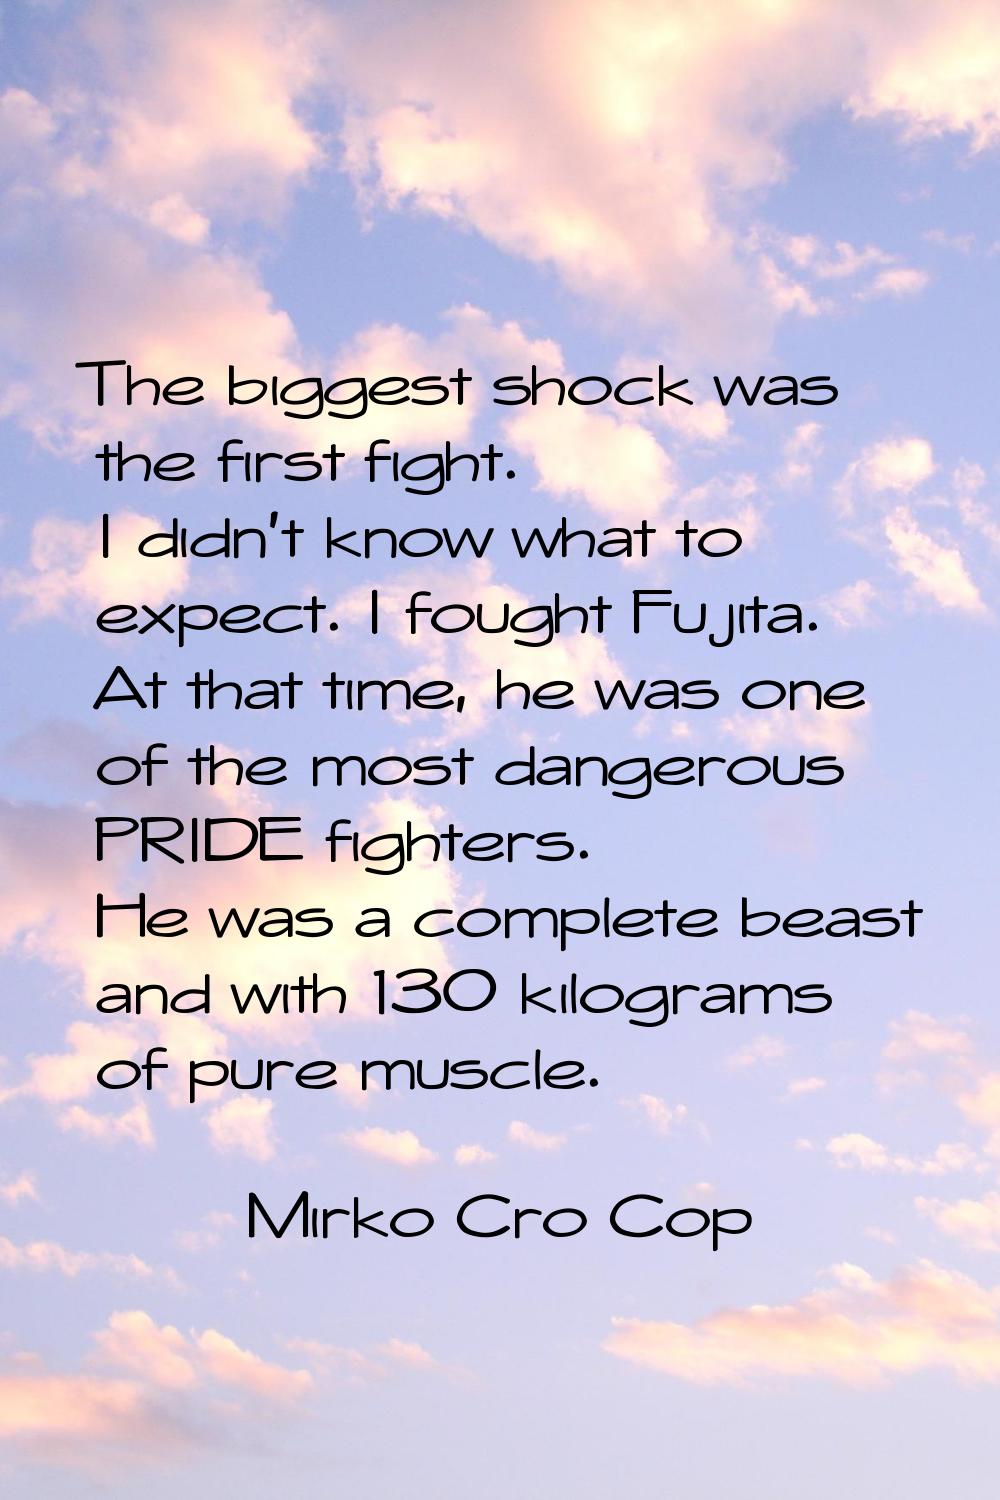 The biggest shock was the first fight. I didn't know what to expect. I fought Fujita. At that time,